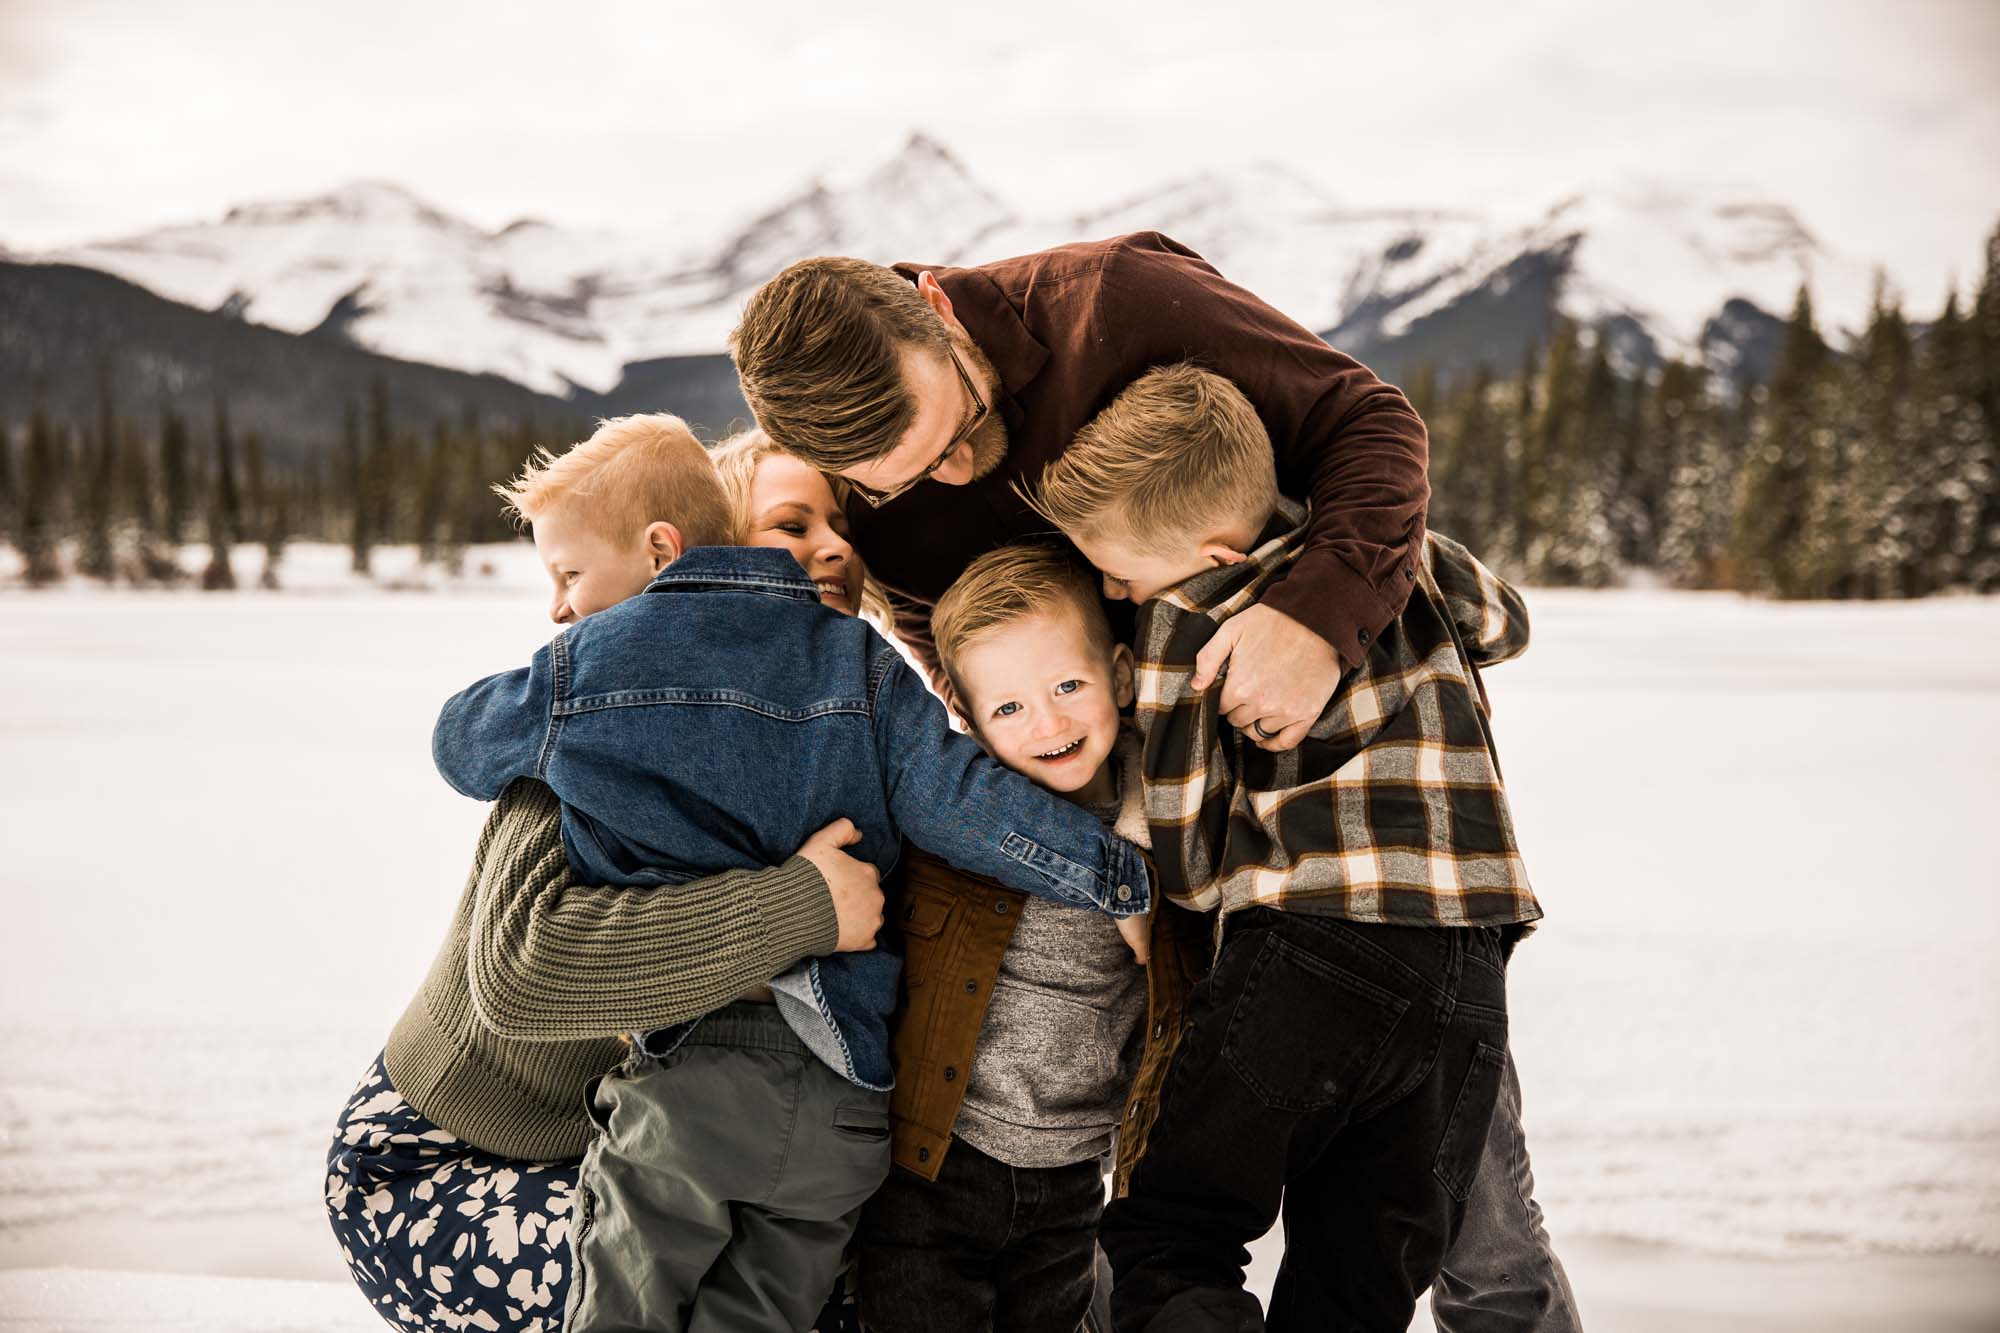 Calgary, Banff, Kananaskis Country lifestyle family photographer, family playing in the snow in the mountains during their photoshoot